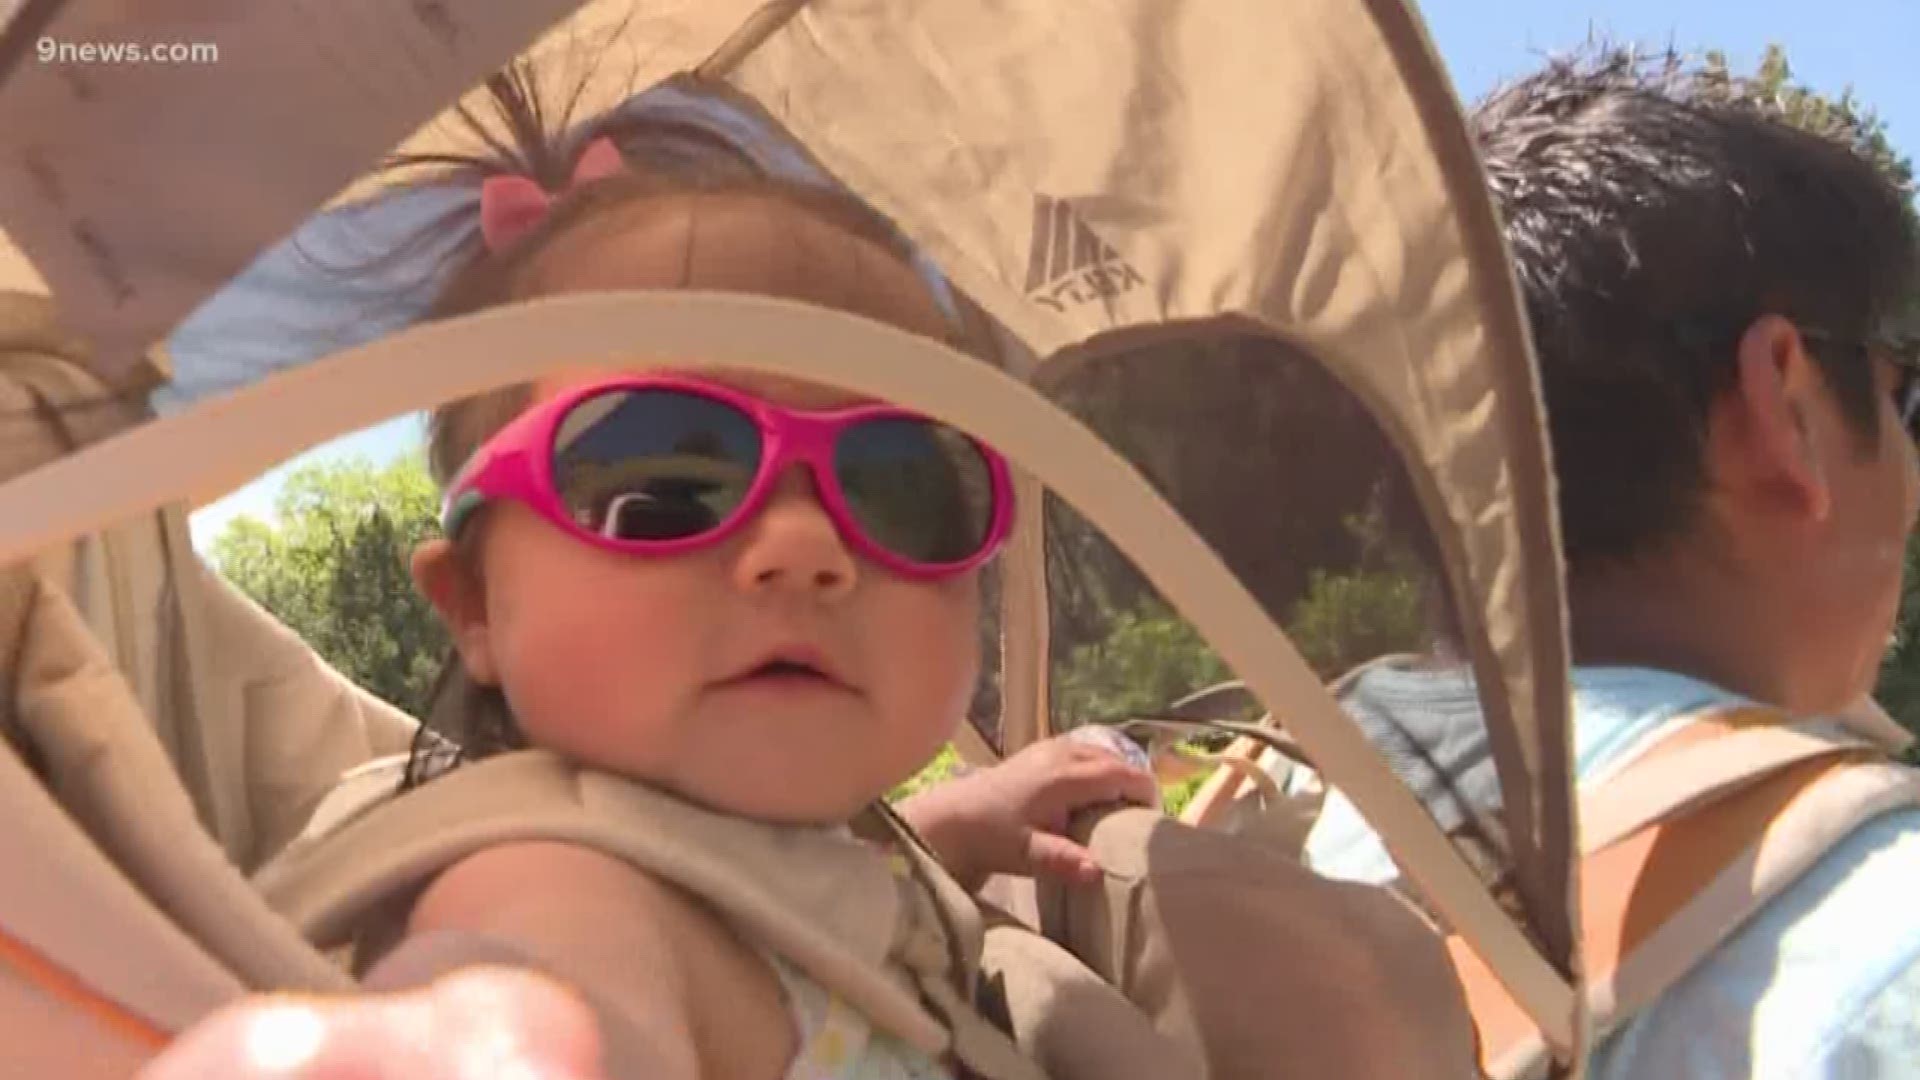 A Colorado dad explains what gear he uses and what he packs when he takes his baby on hikes.